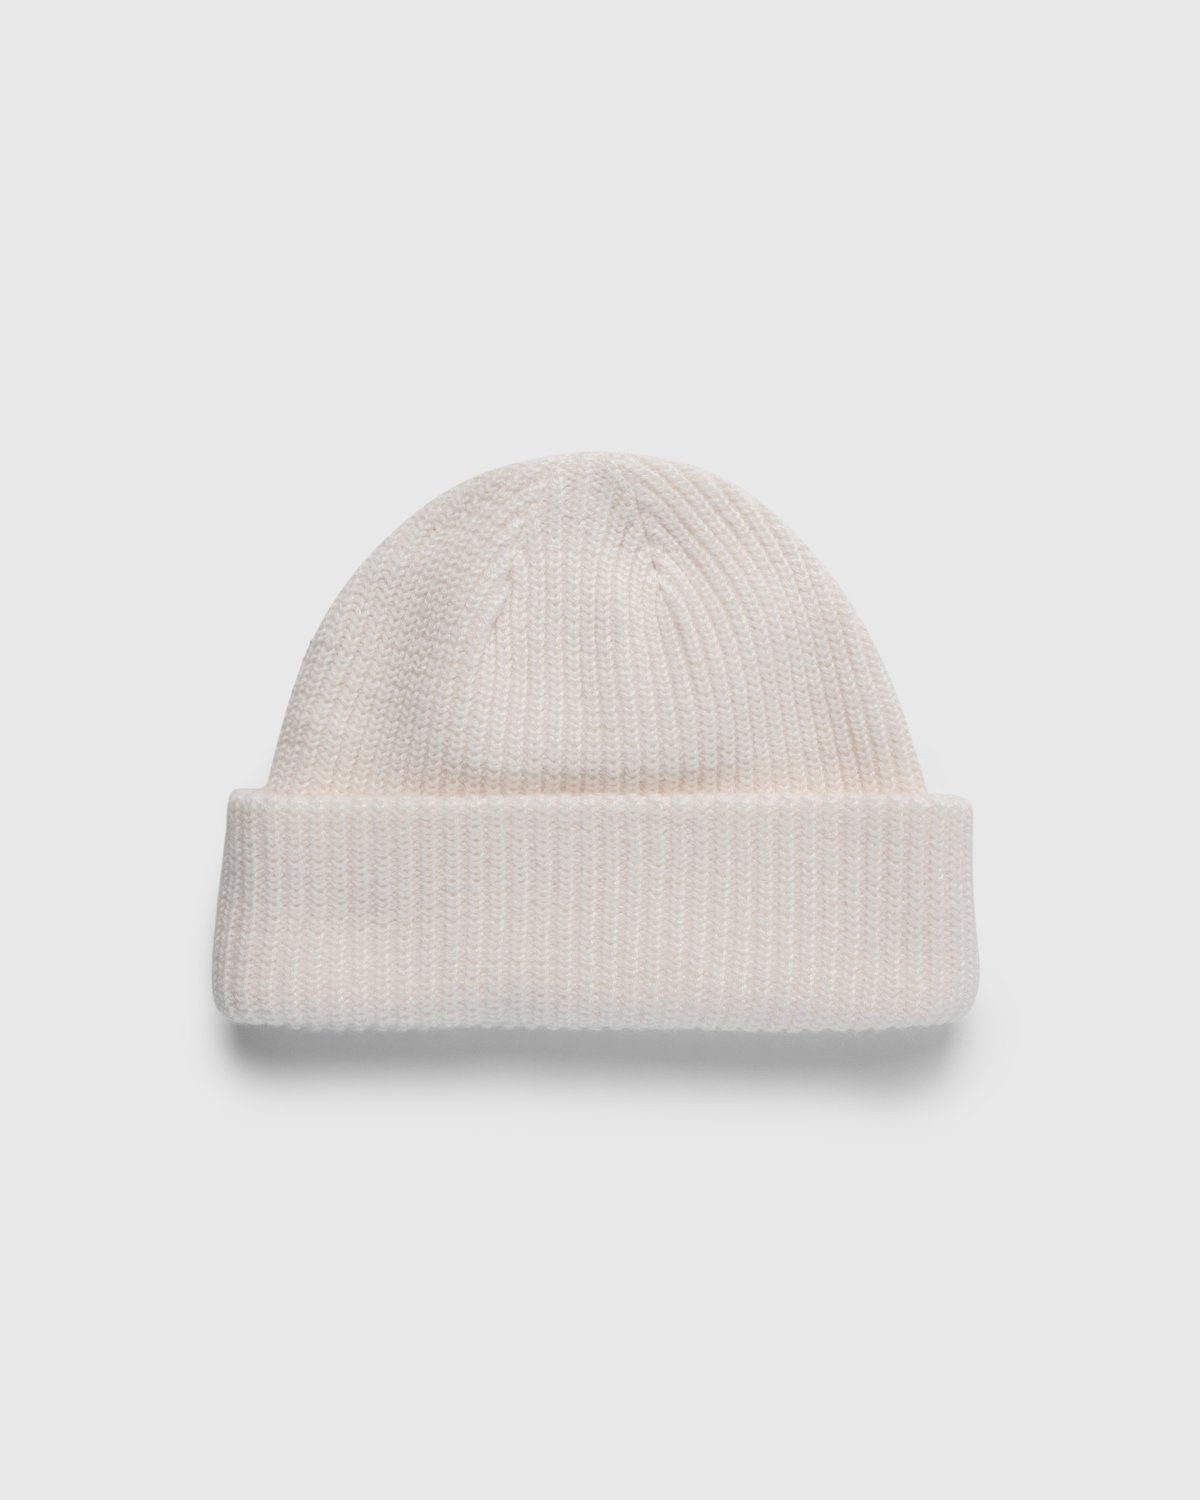 The North Face - Salty Dog Beanie Gardenia White - Accessories - White - Image 2